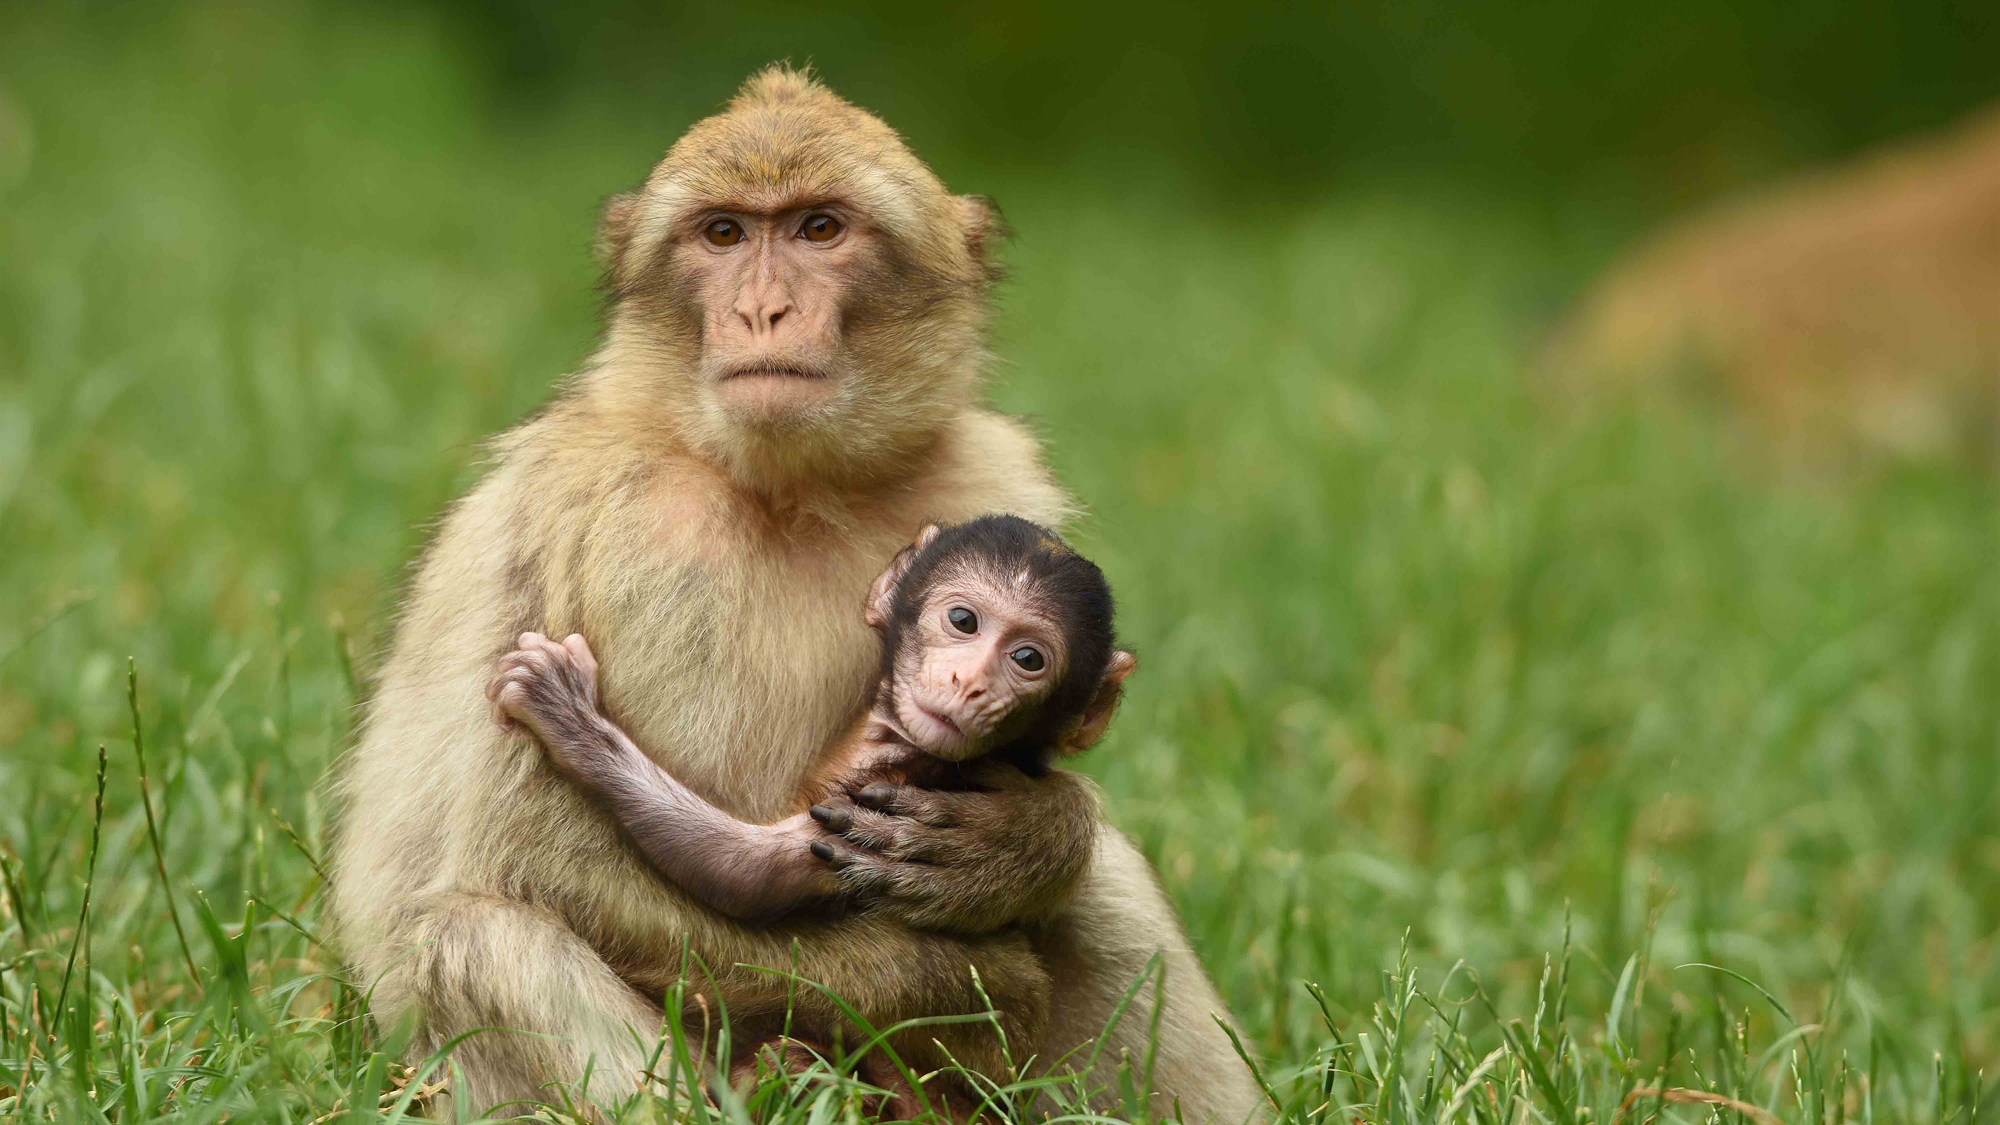 Mother and Baby Monkey HD Wallpaper